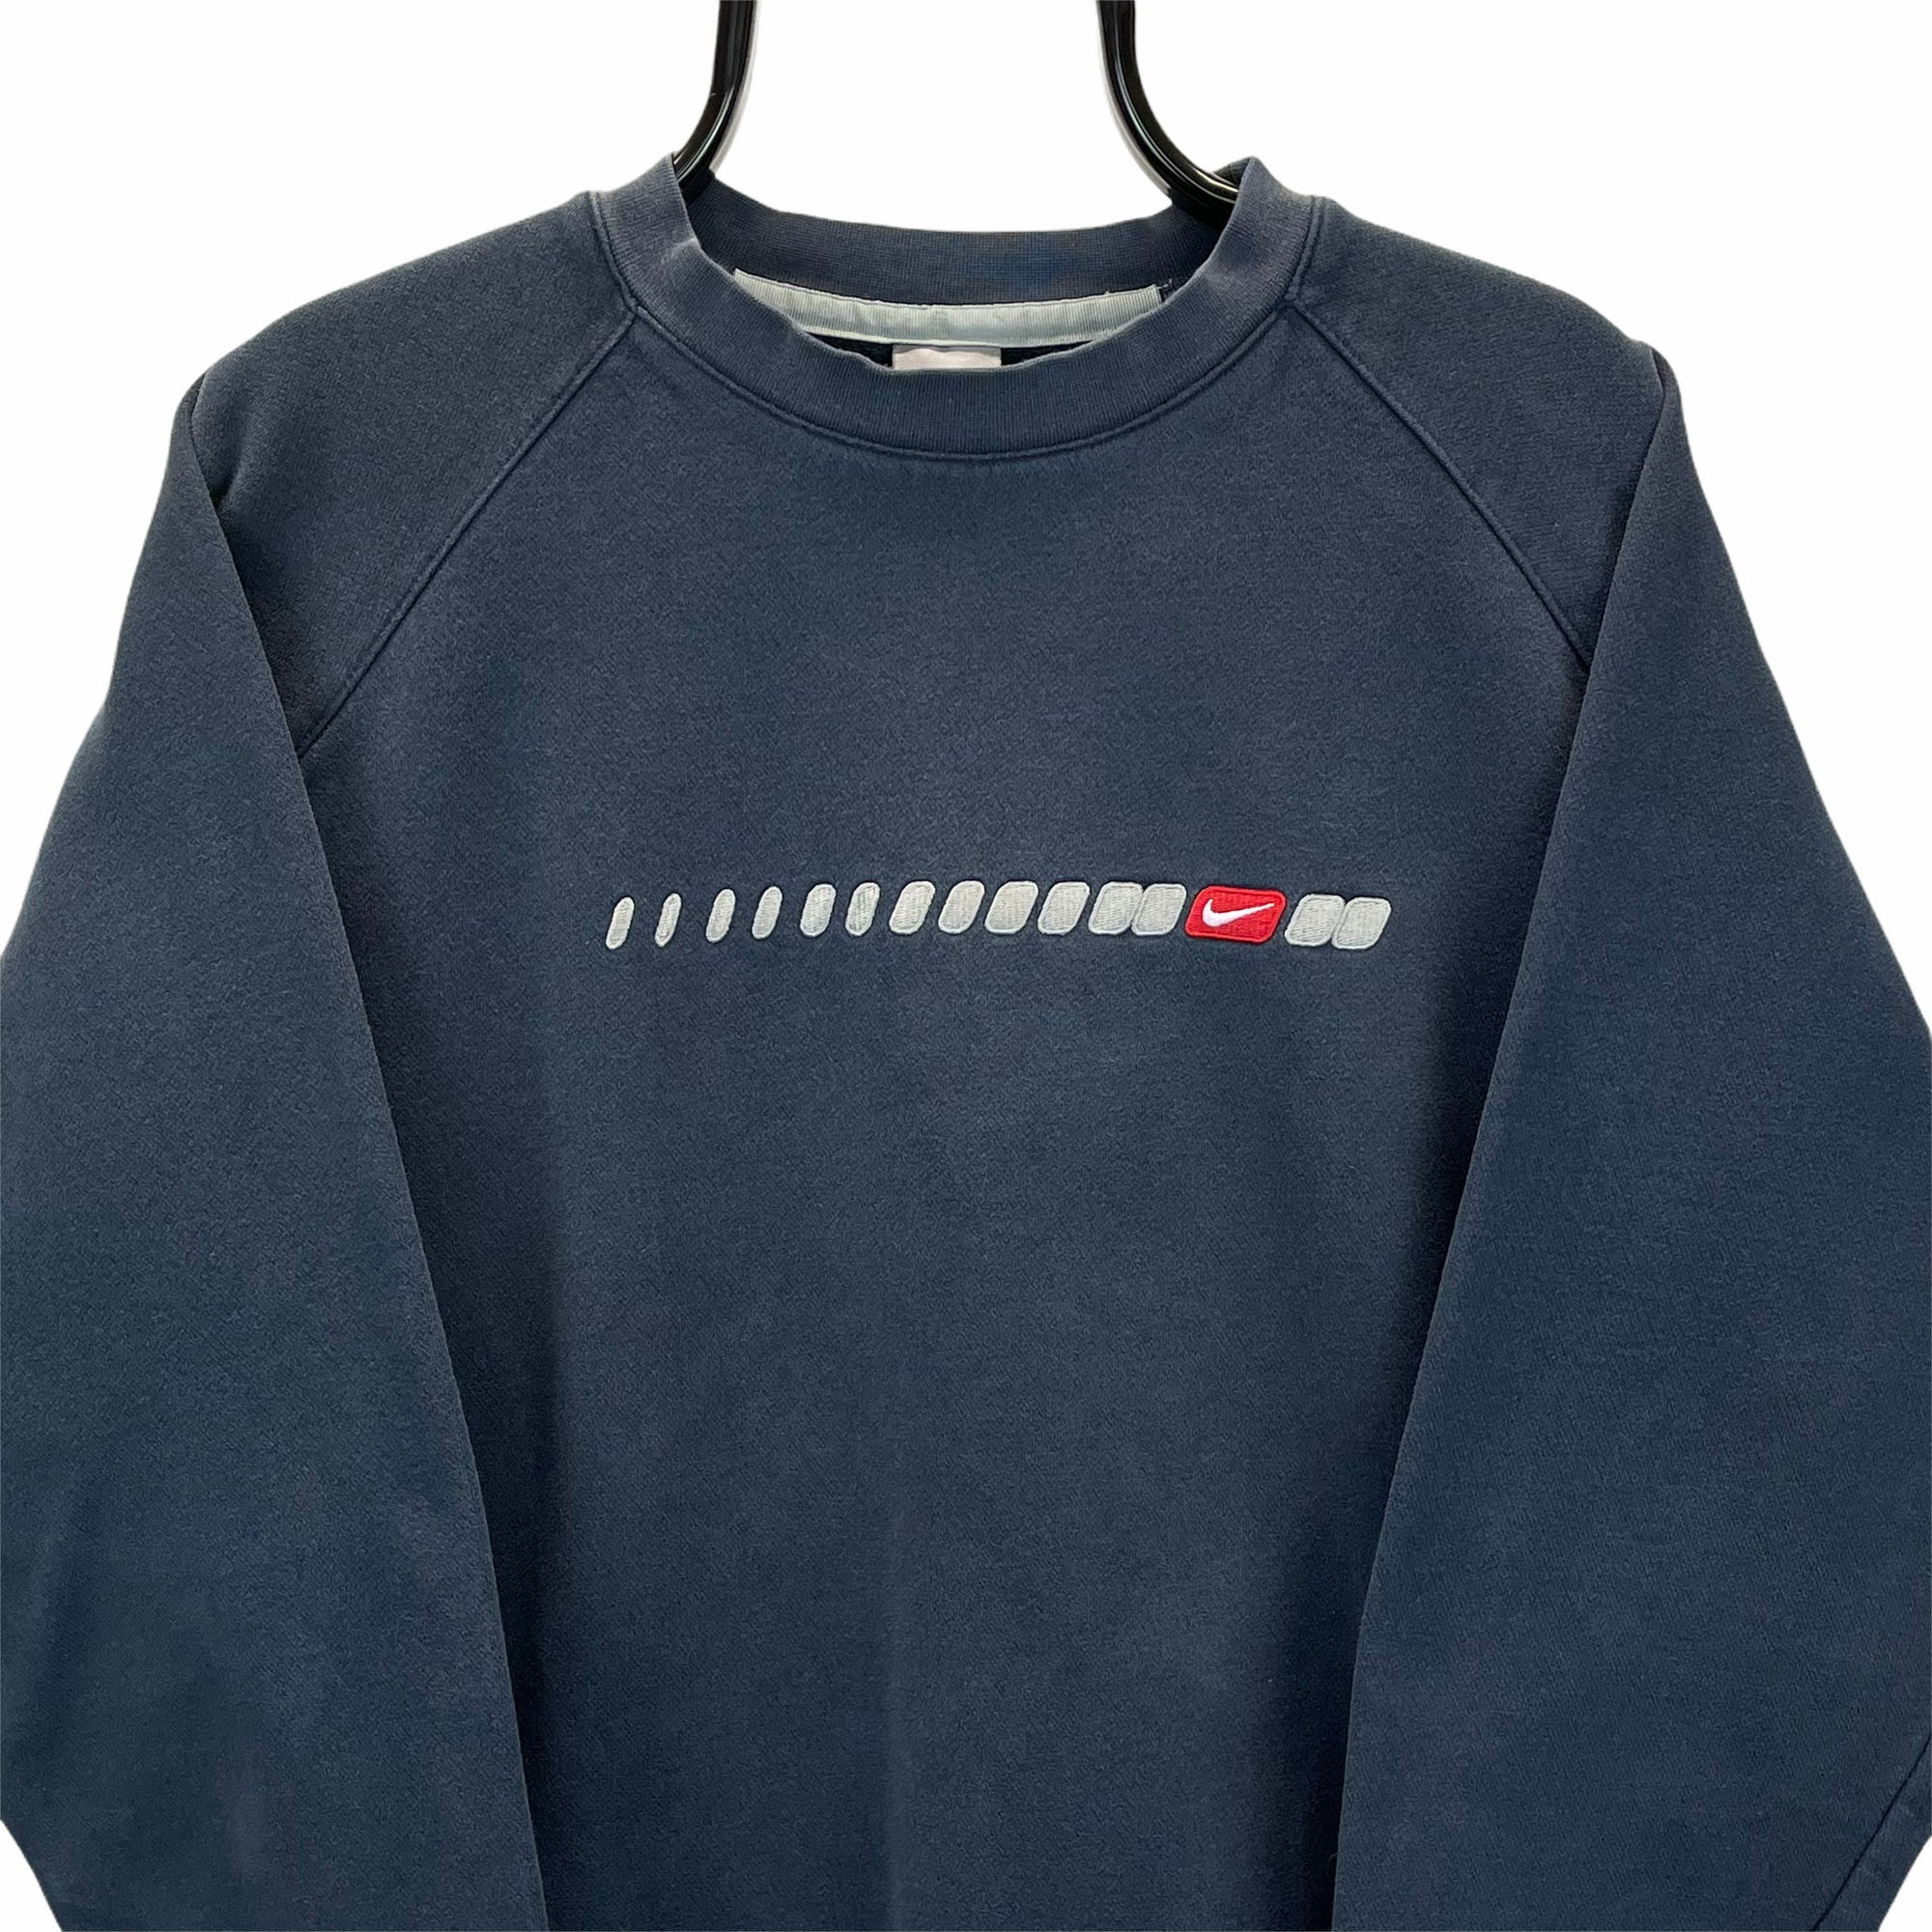 VINTAGE NIKE EMBROIDERED SMALL SWOOSH SWEATSHIRT IN WASHED NAVY - MEN'S MEDIUM/WOMEN'S LARGE